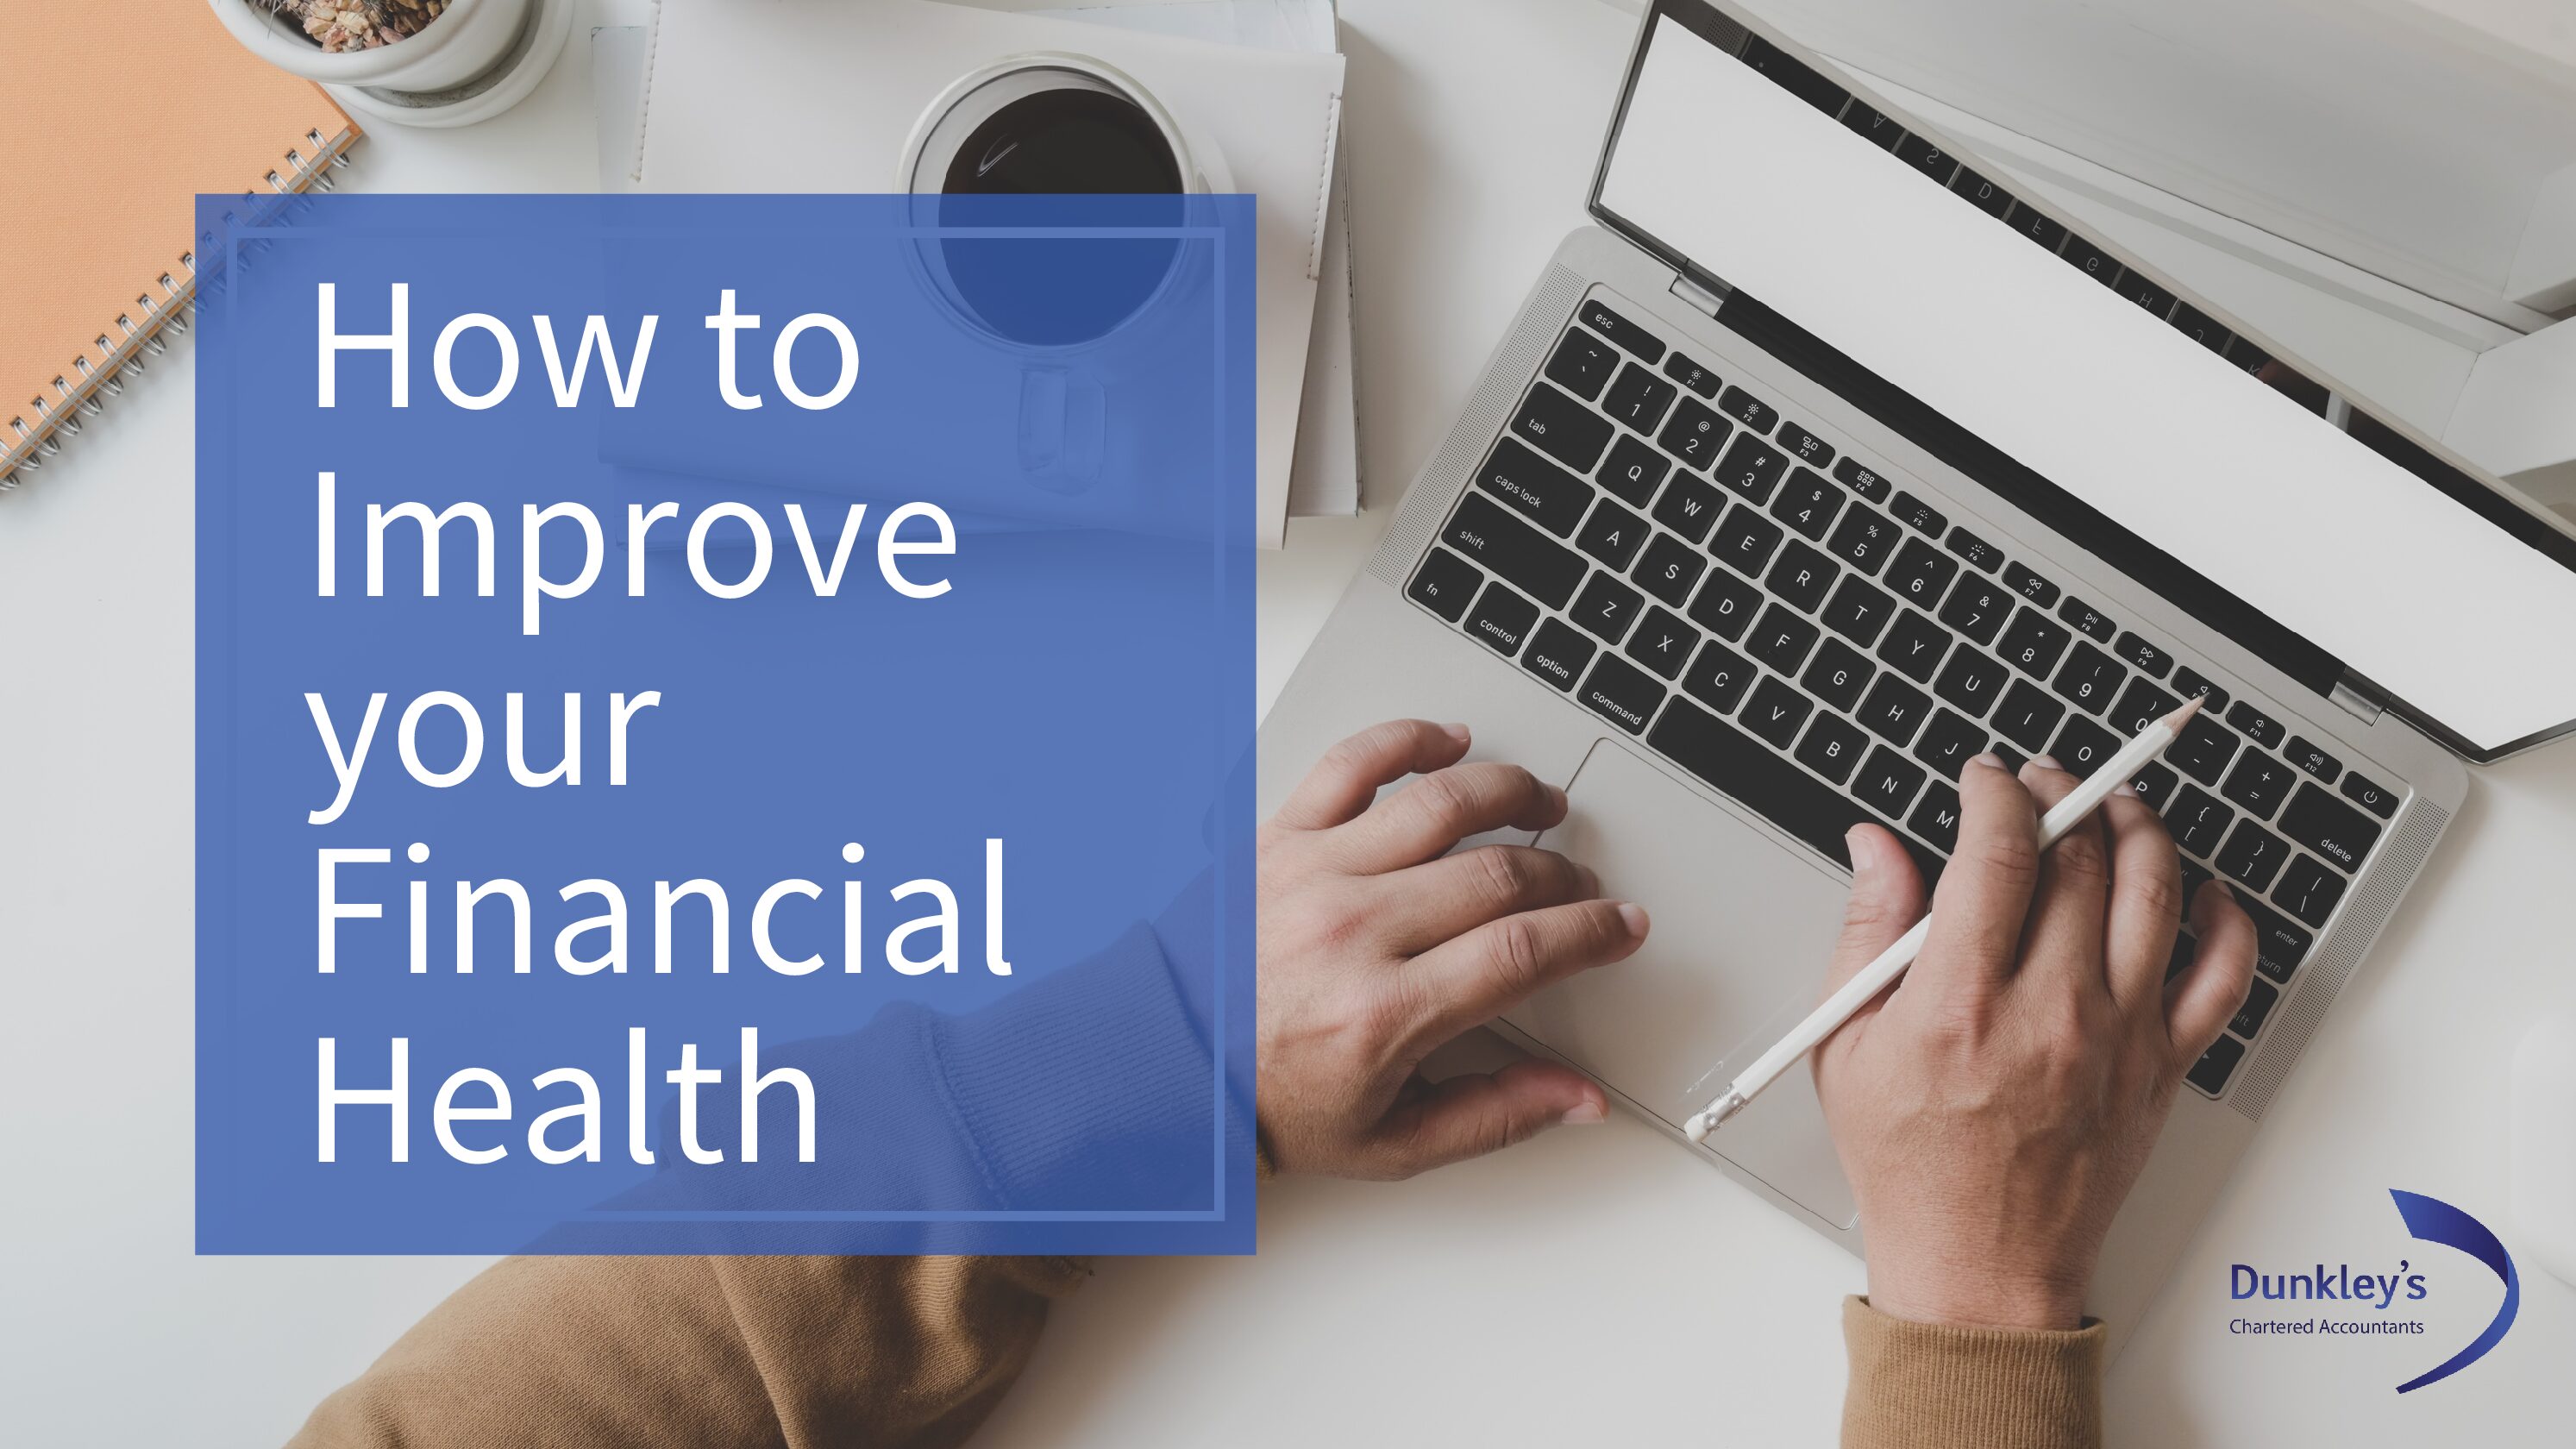 How to Improve your Financial Health